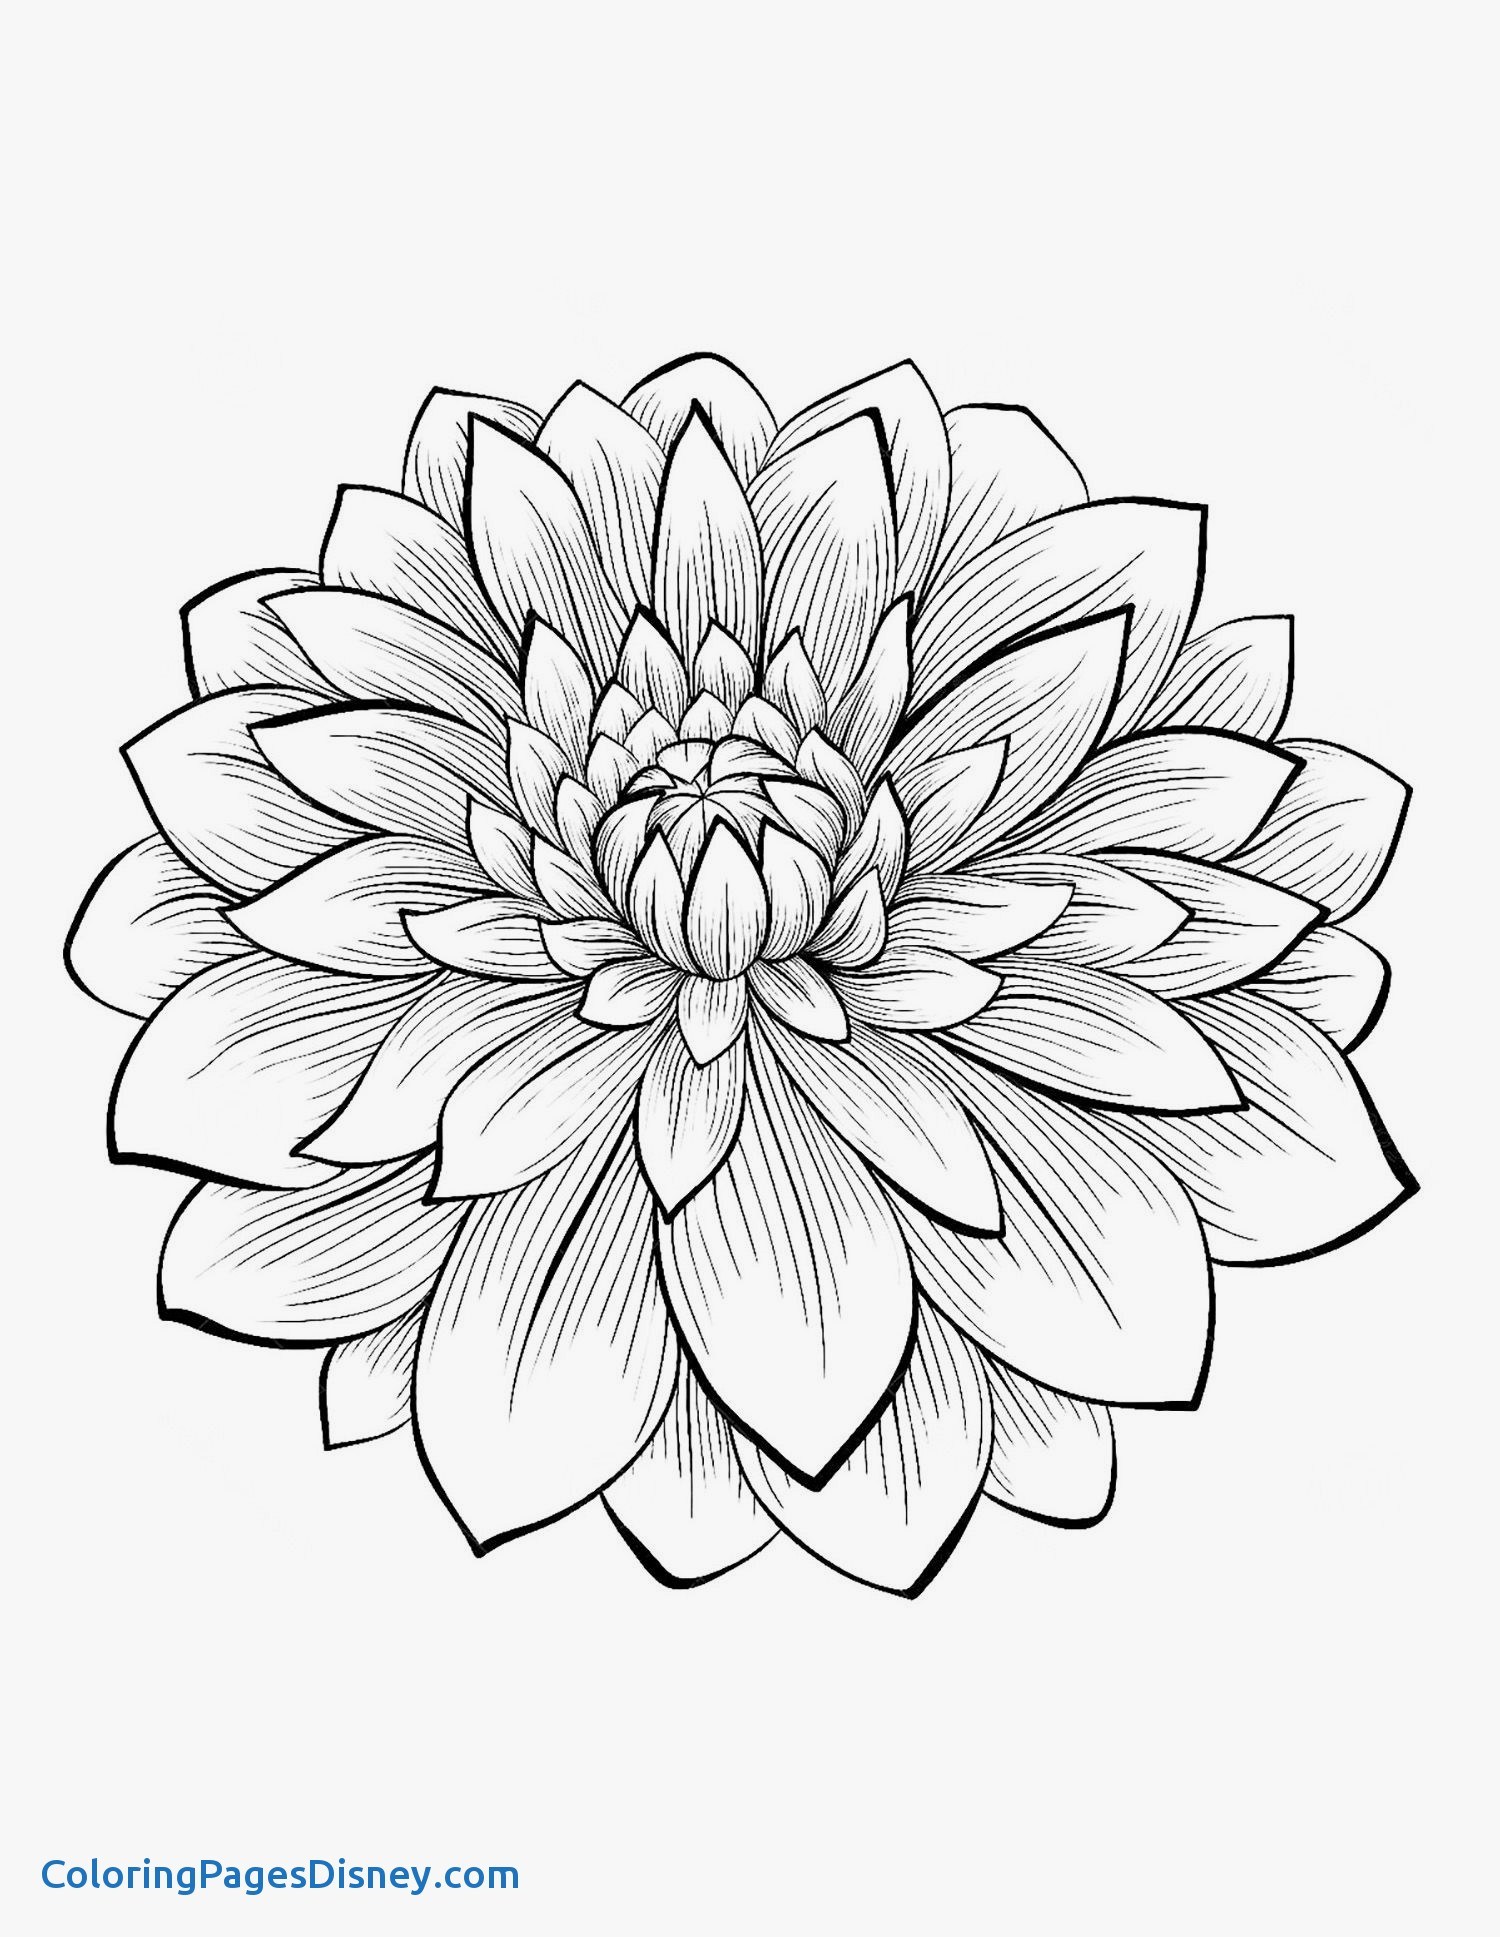 Luxury Dahlia Coloring Pages - Coloring Pages Disney